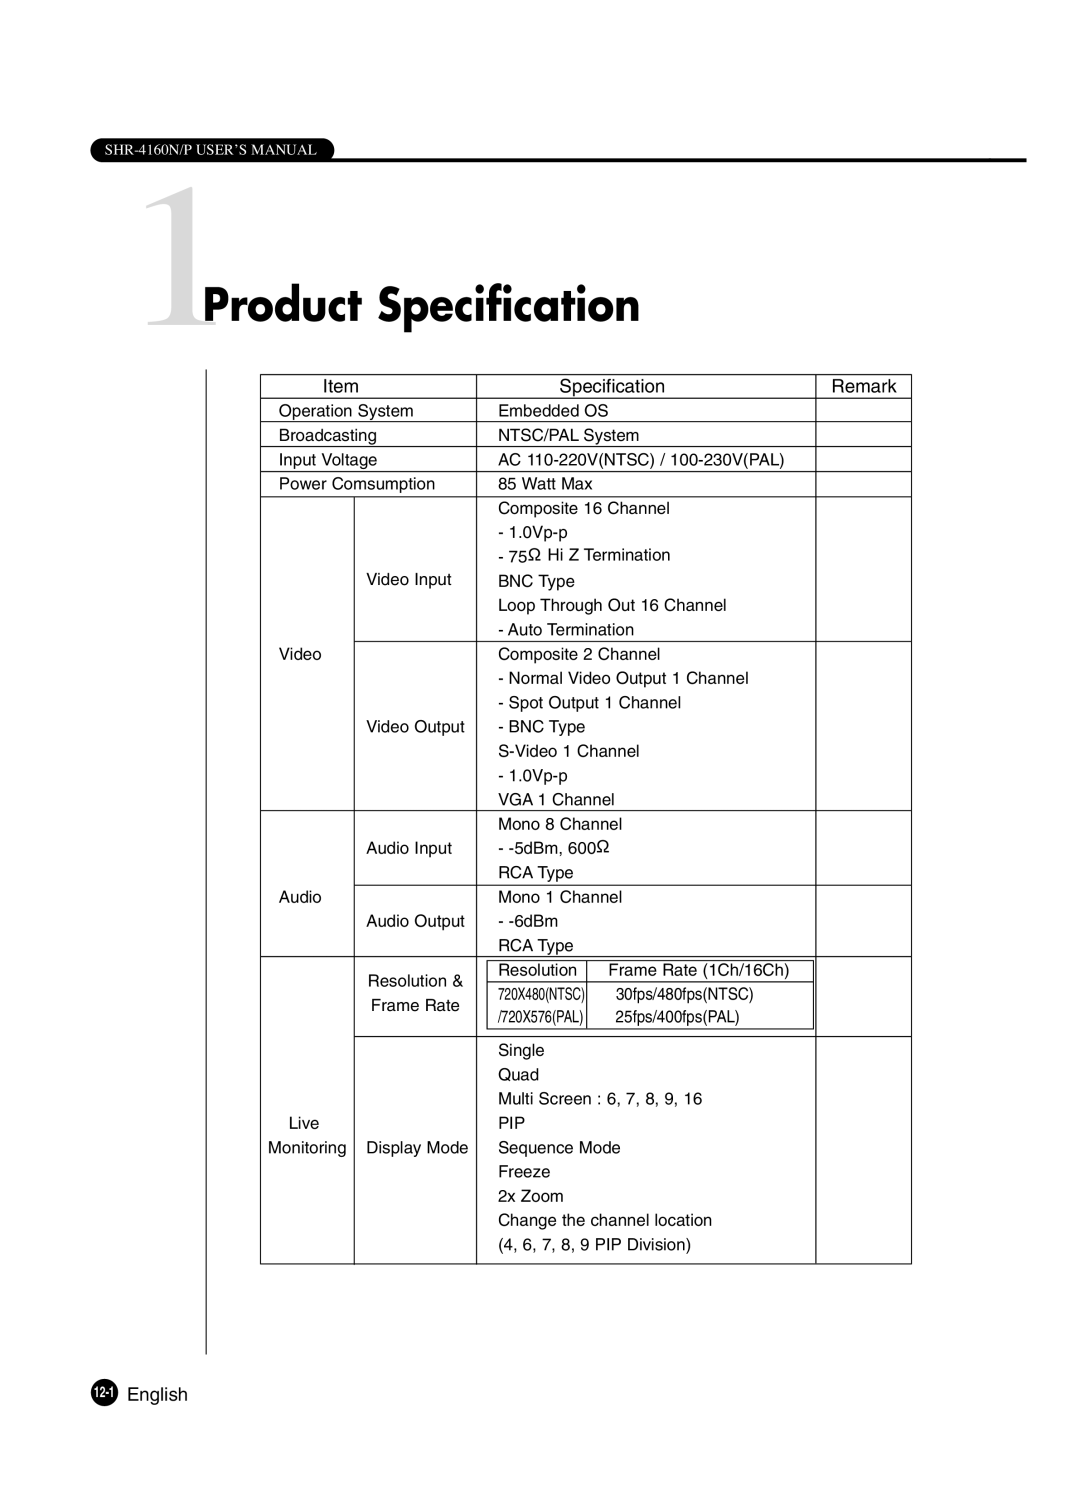 Samsung SHR-4160P manual 1Product Specification, Specification Remark, 12-1English 